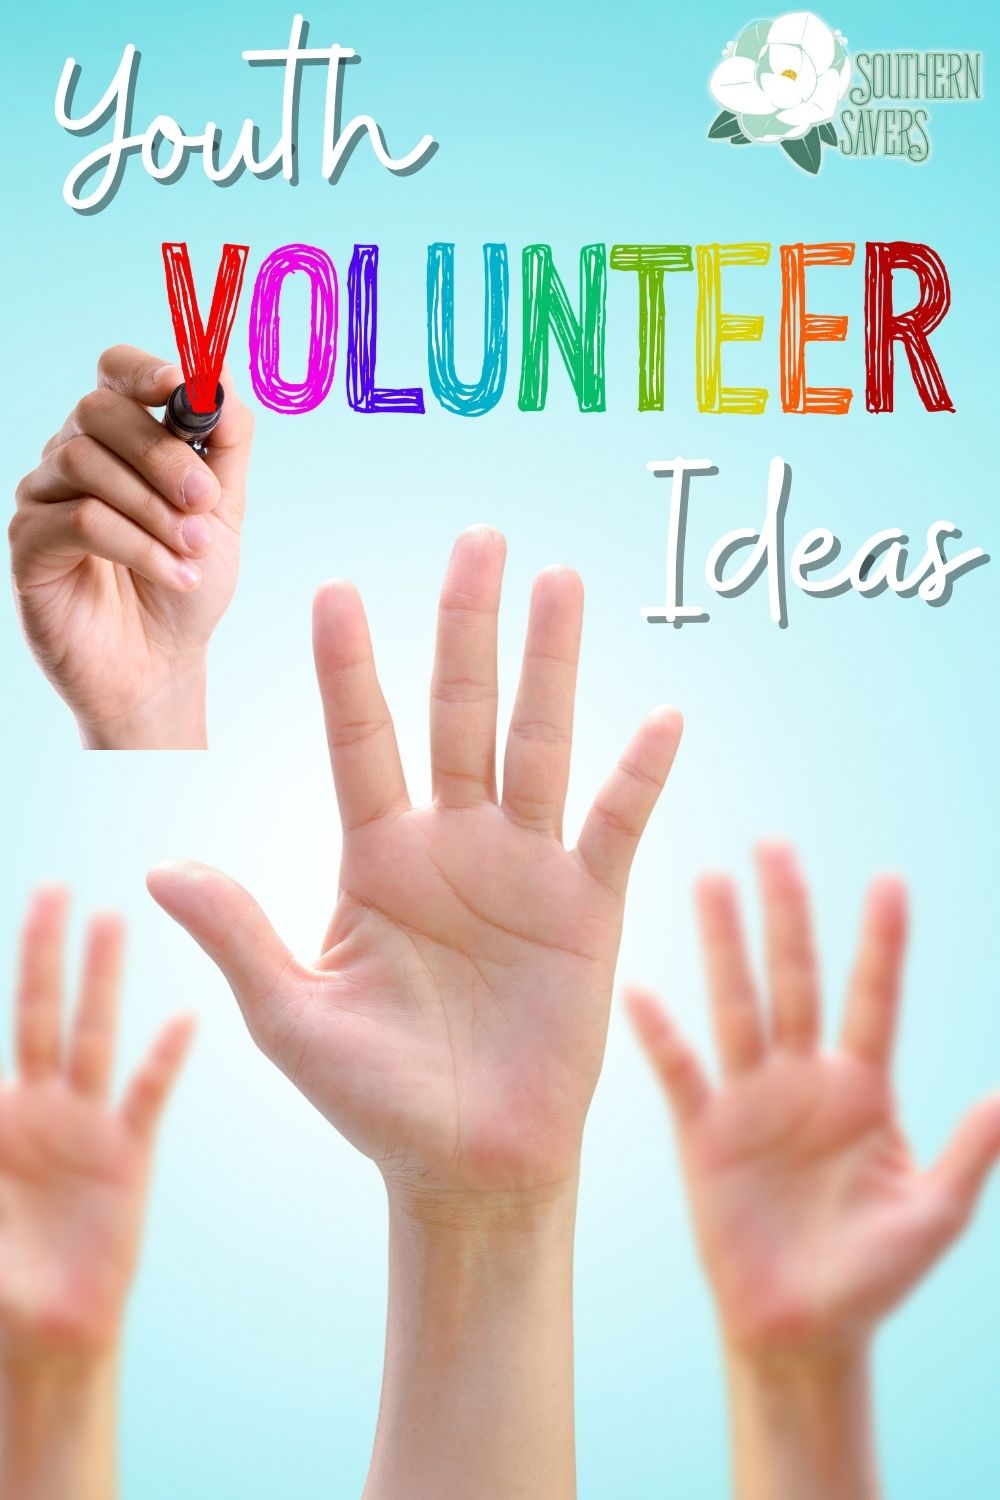 Make it a point to fill up some of your family's free time this summer with an opportunity to help others. Here's a list of kid-friendly volunteer ideas.